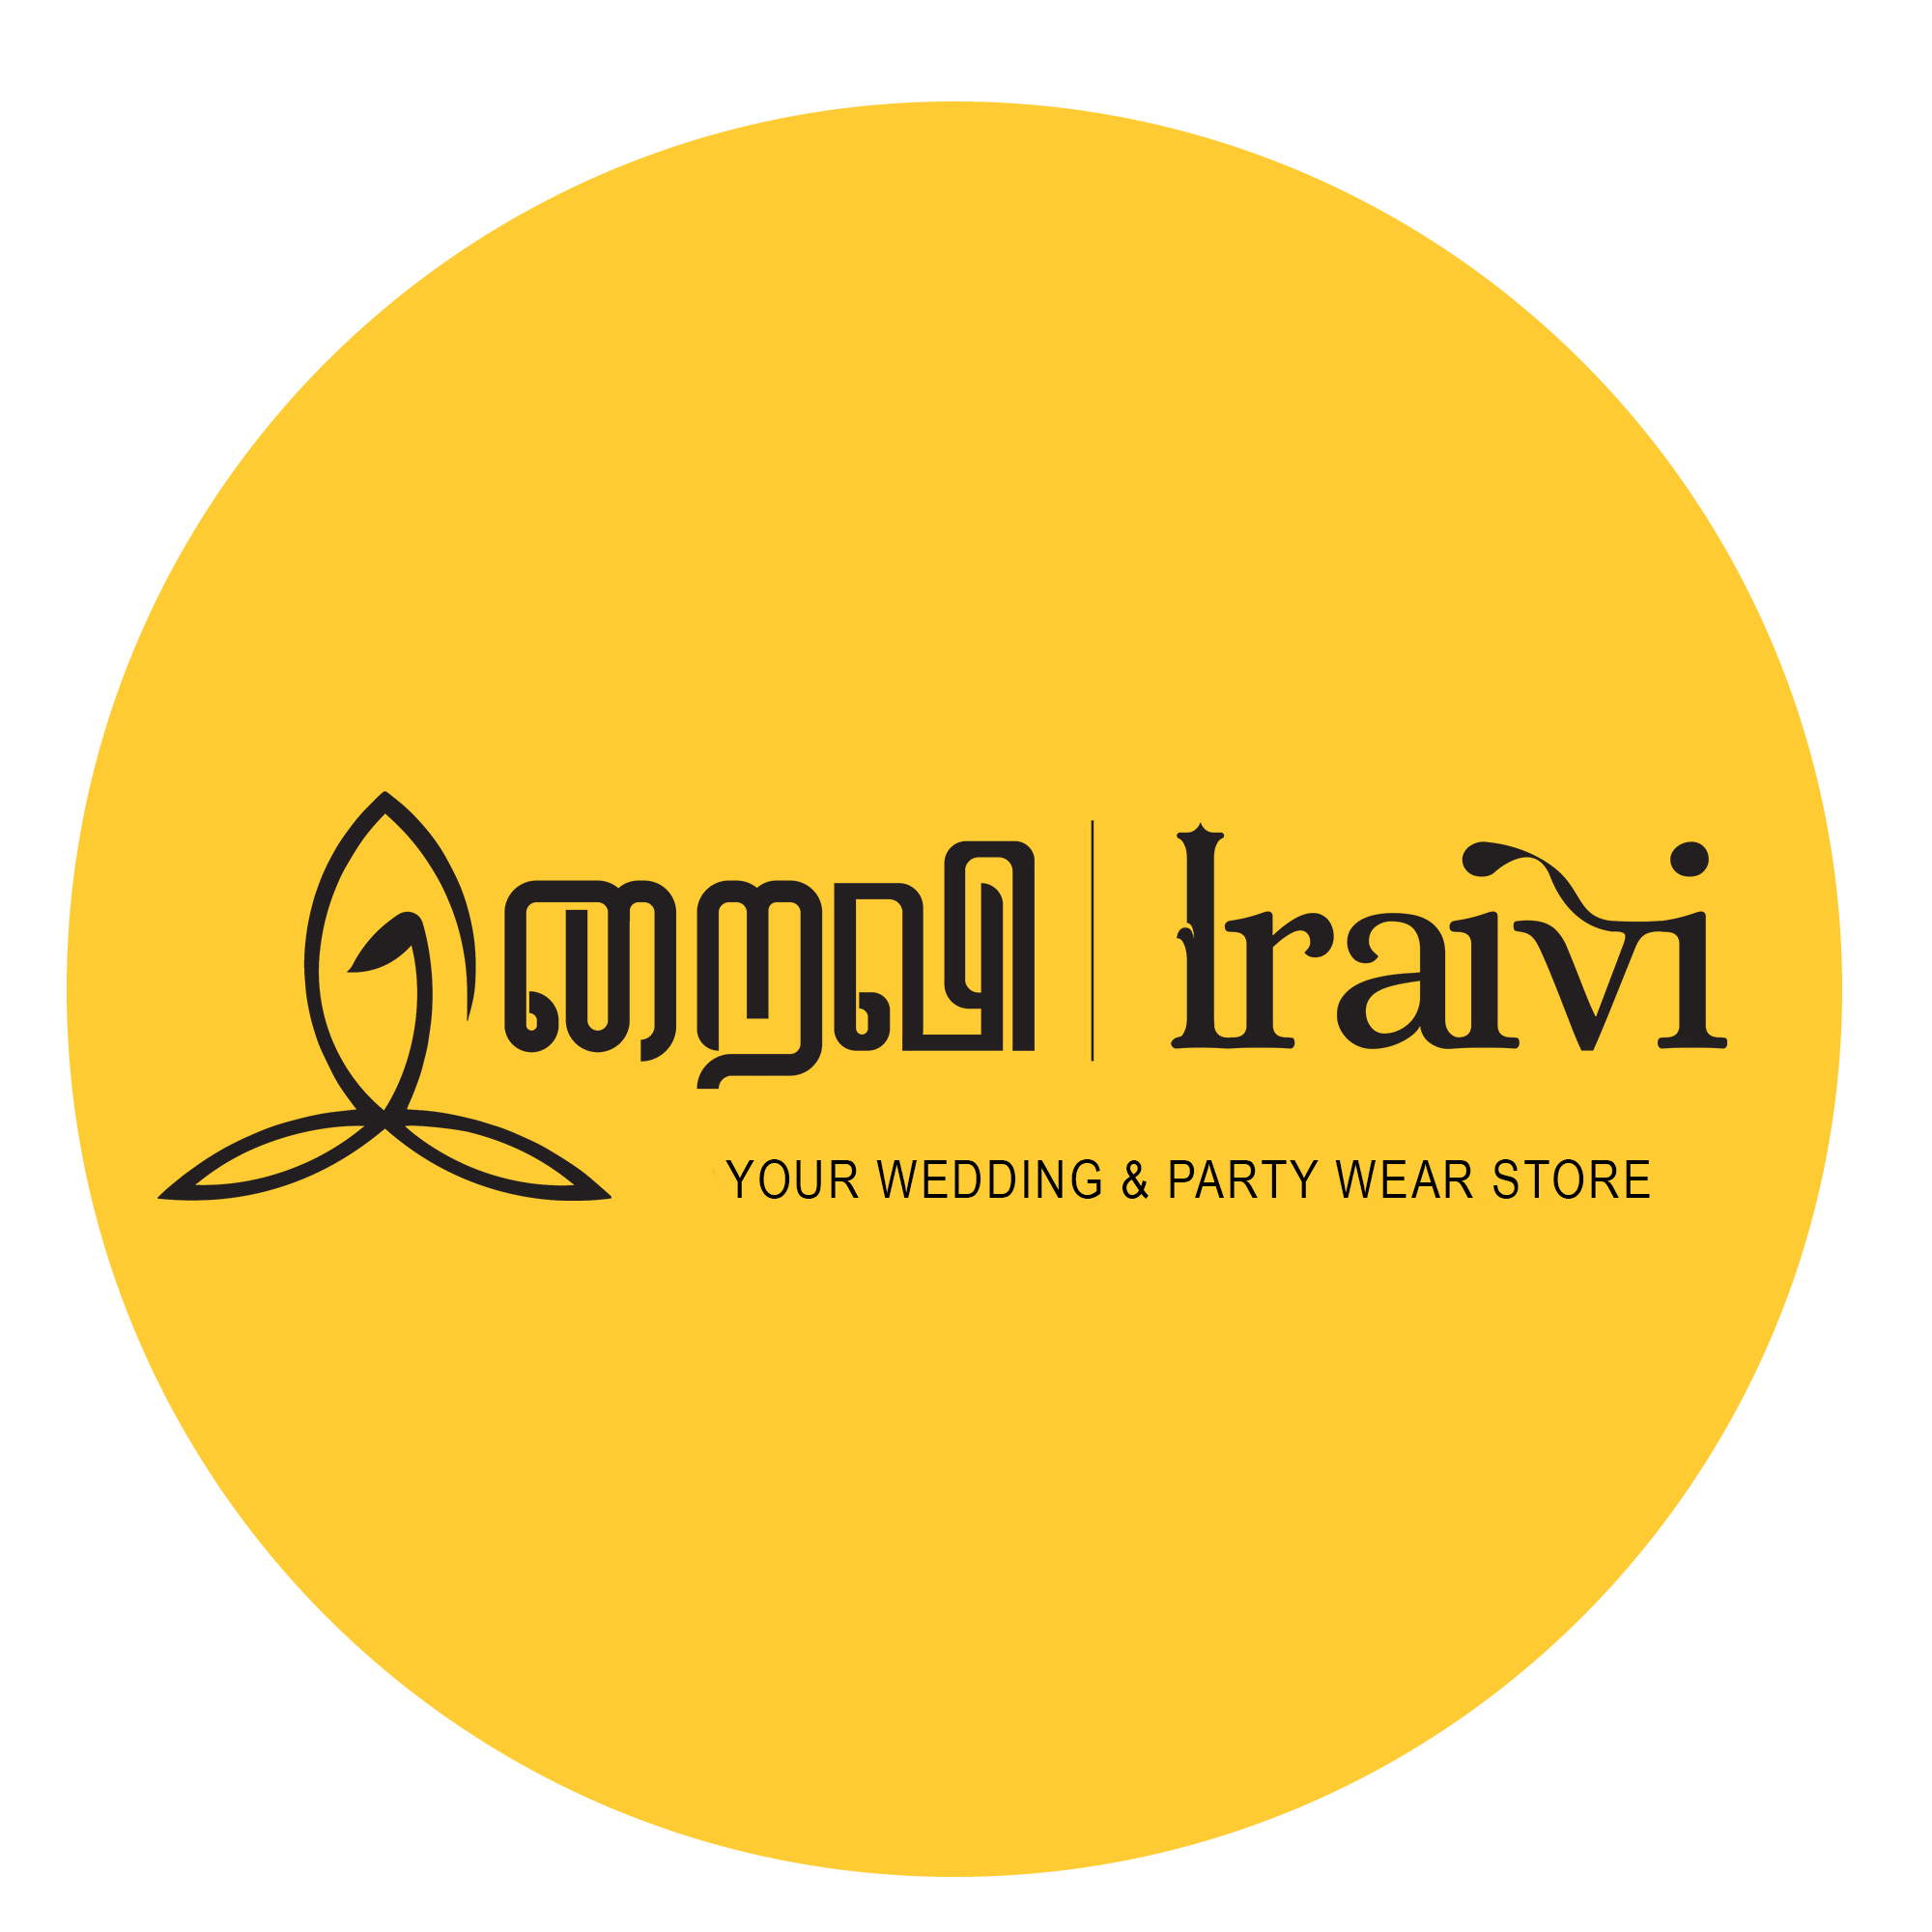 Iraivi - Wedding and Party wear